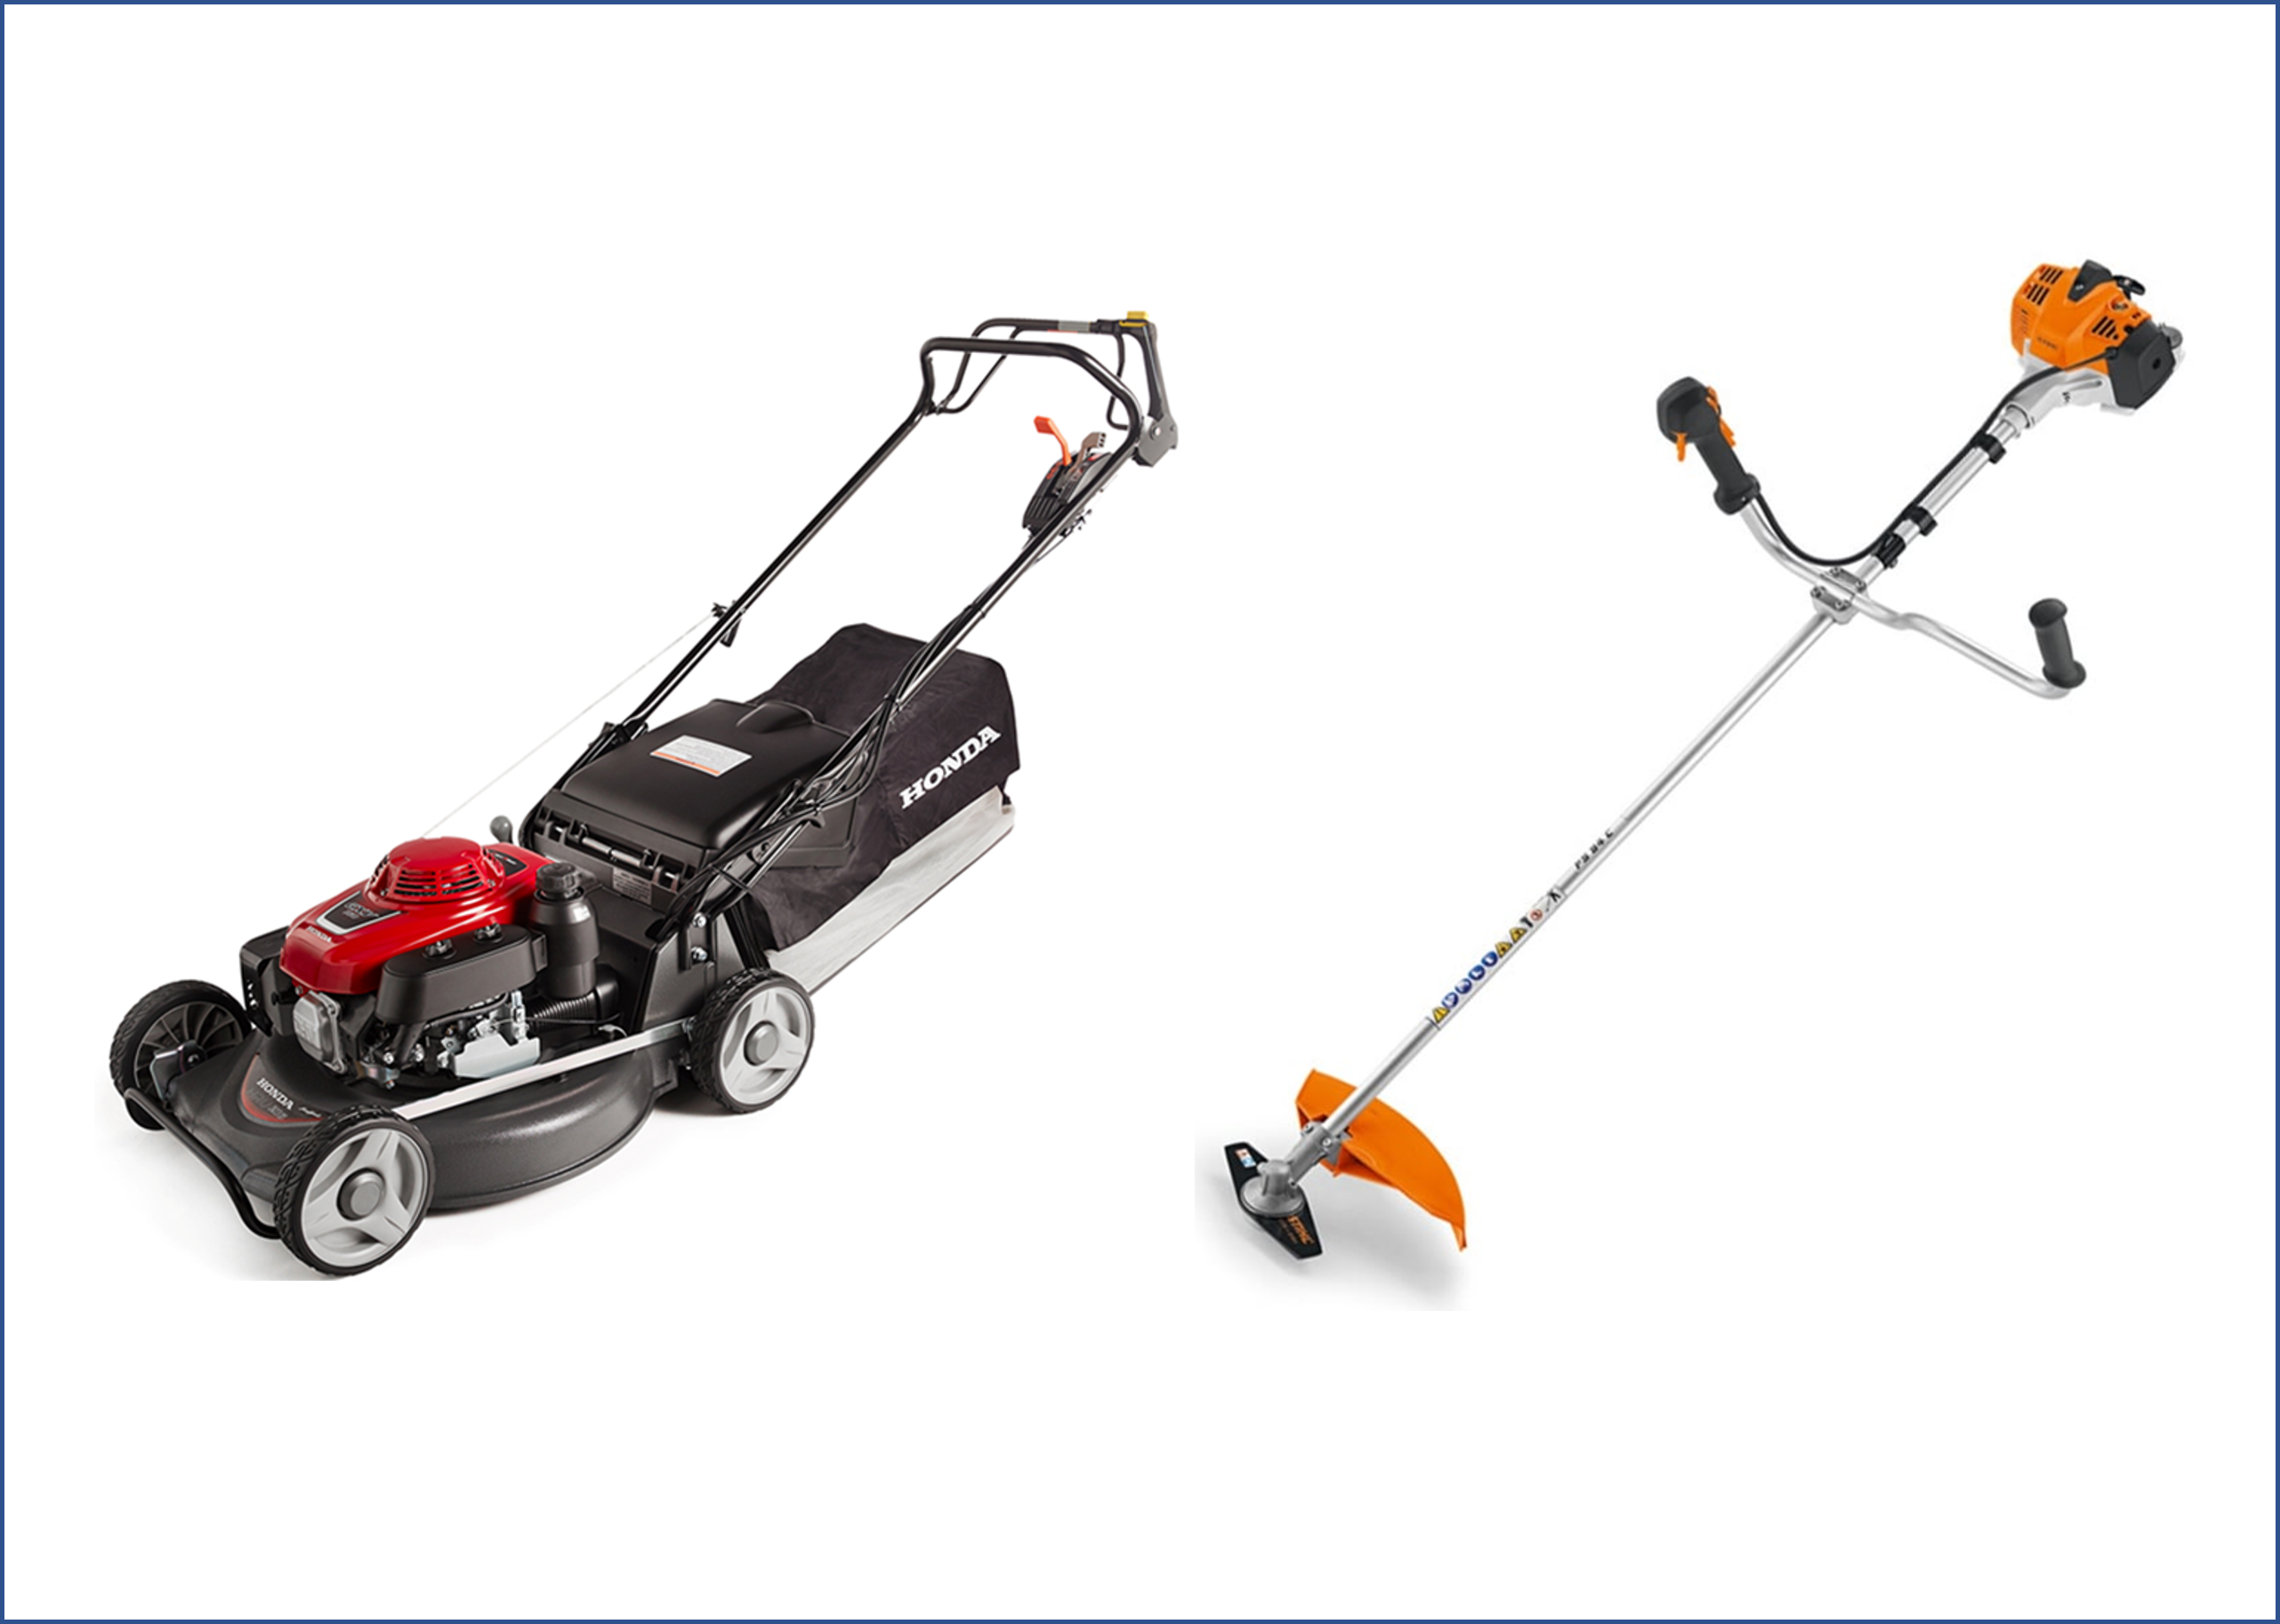 Commercial Lawn Mower & FS91 Brush Cutter Package